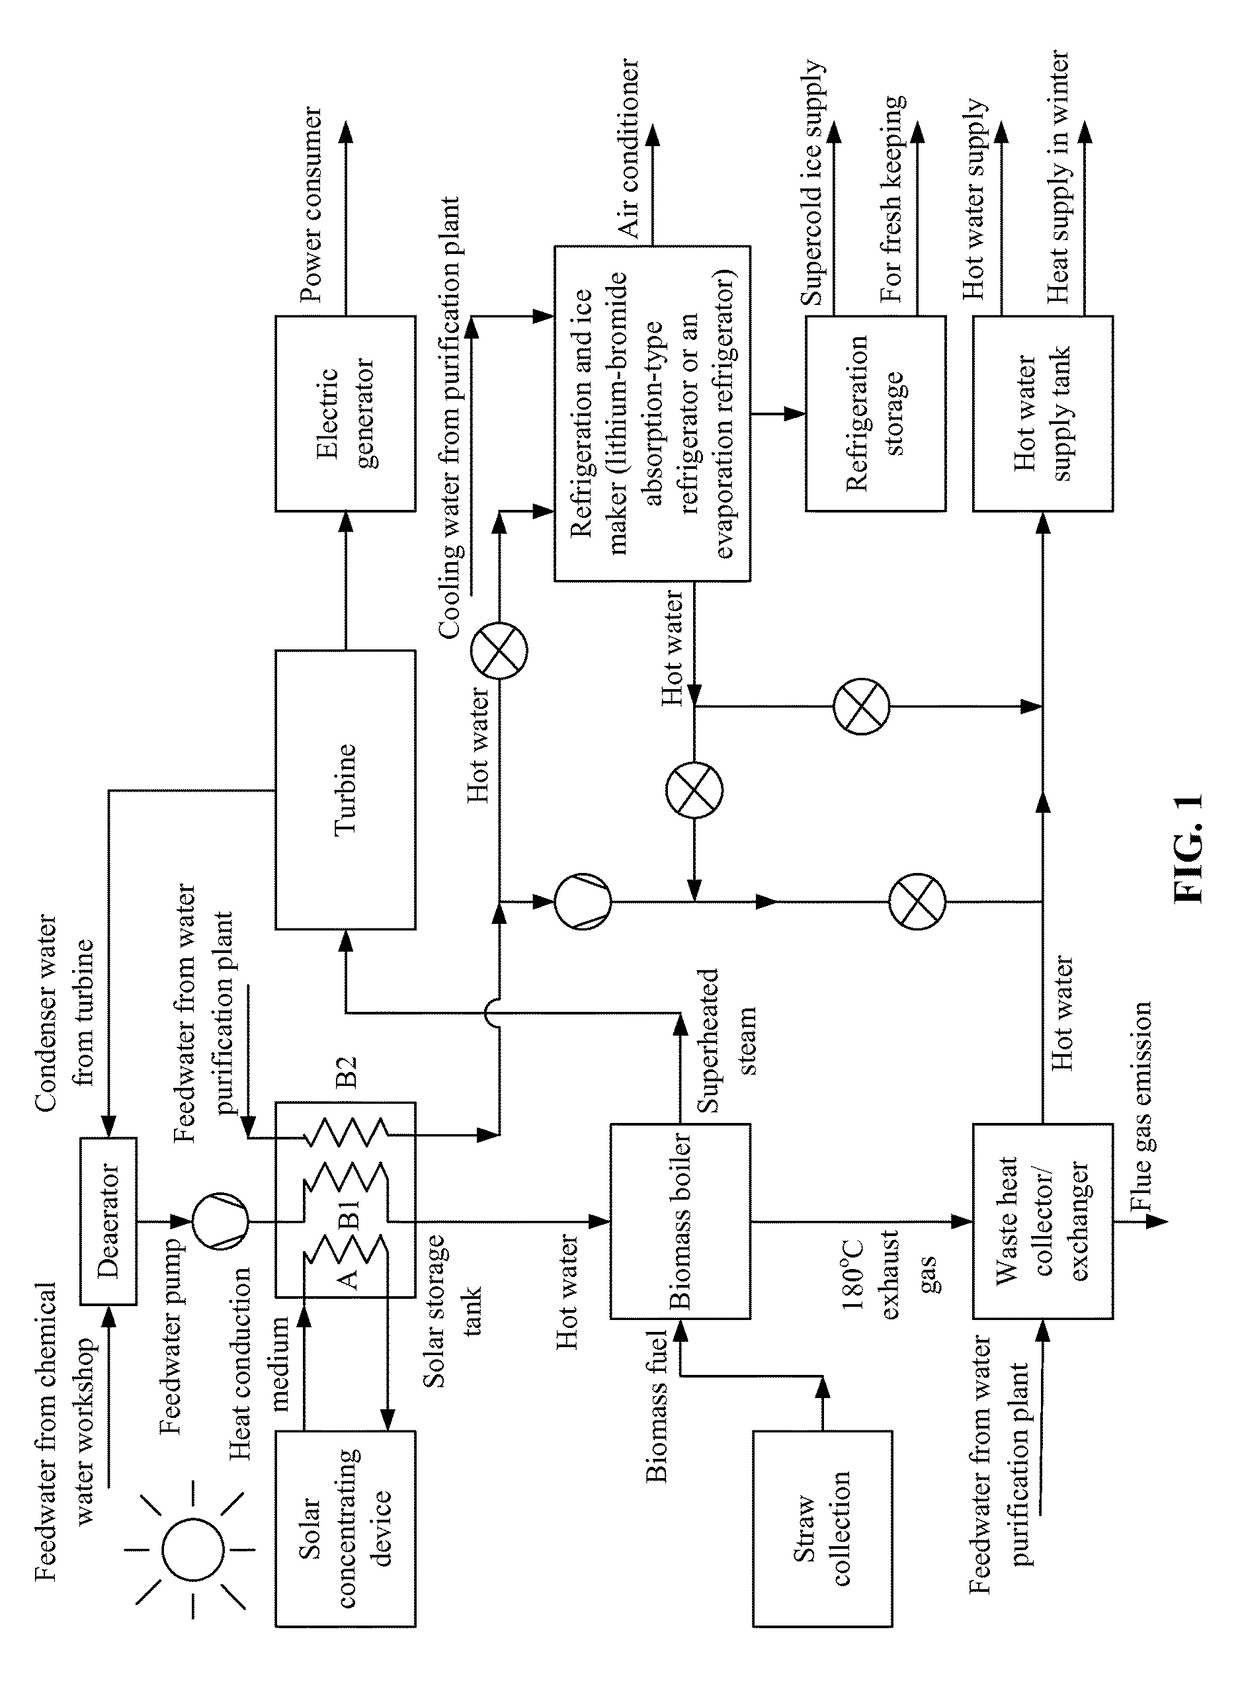 Solar-biomass complementary thermal energy supply system